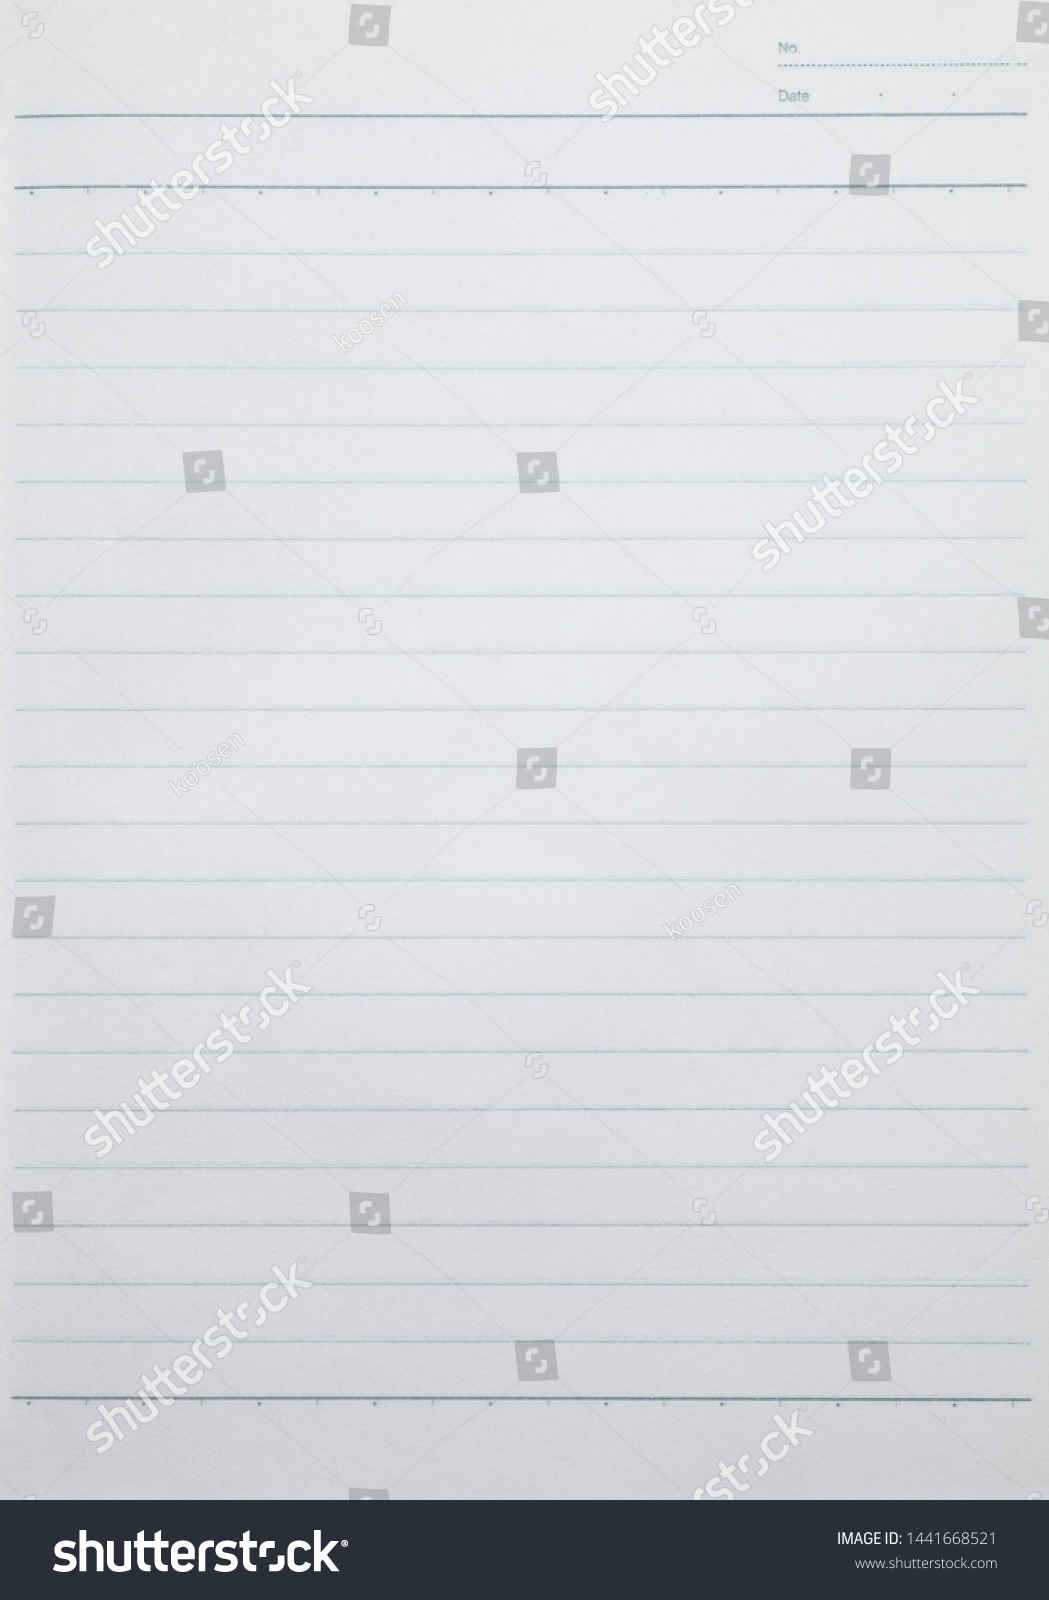 Lined Sheet Paper Blank Half Writing Printable Template Regarding Blank Letter Writing Template For Kids